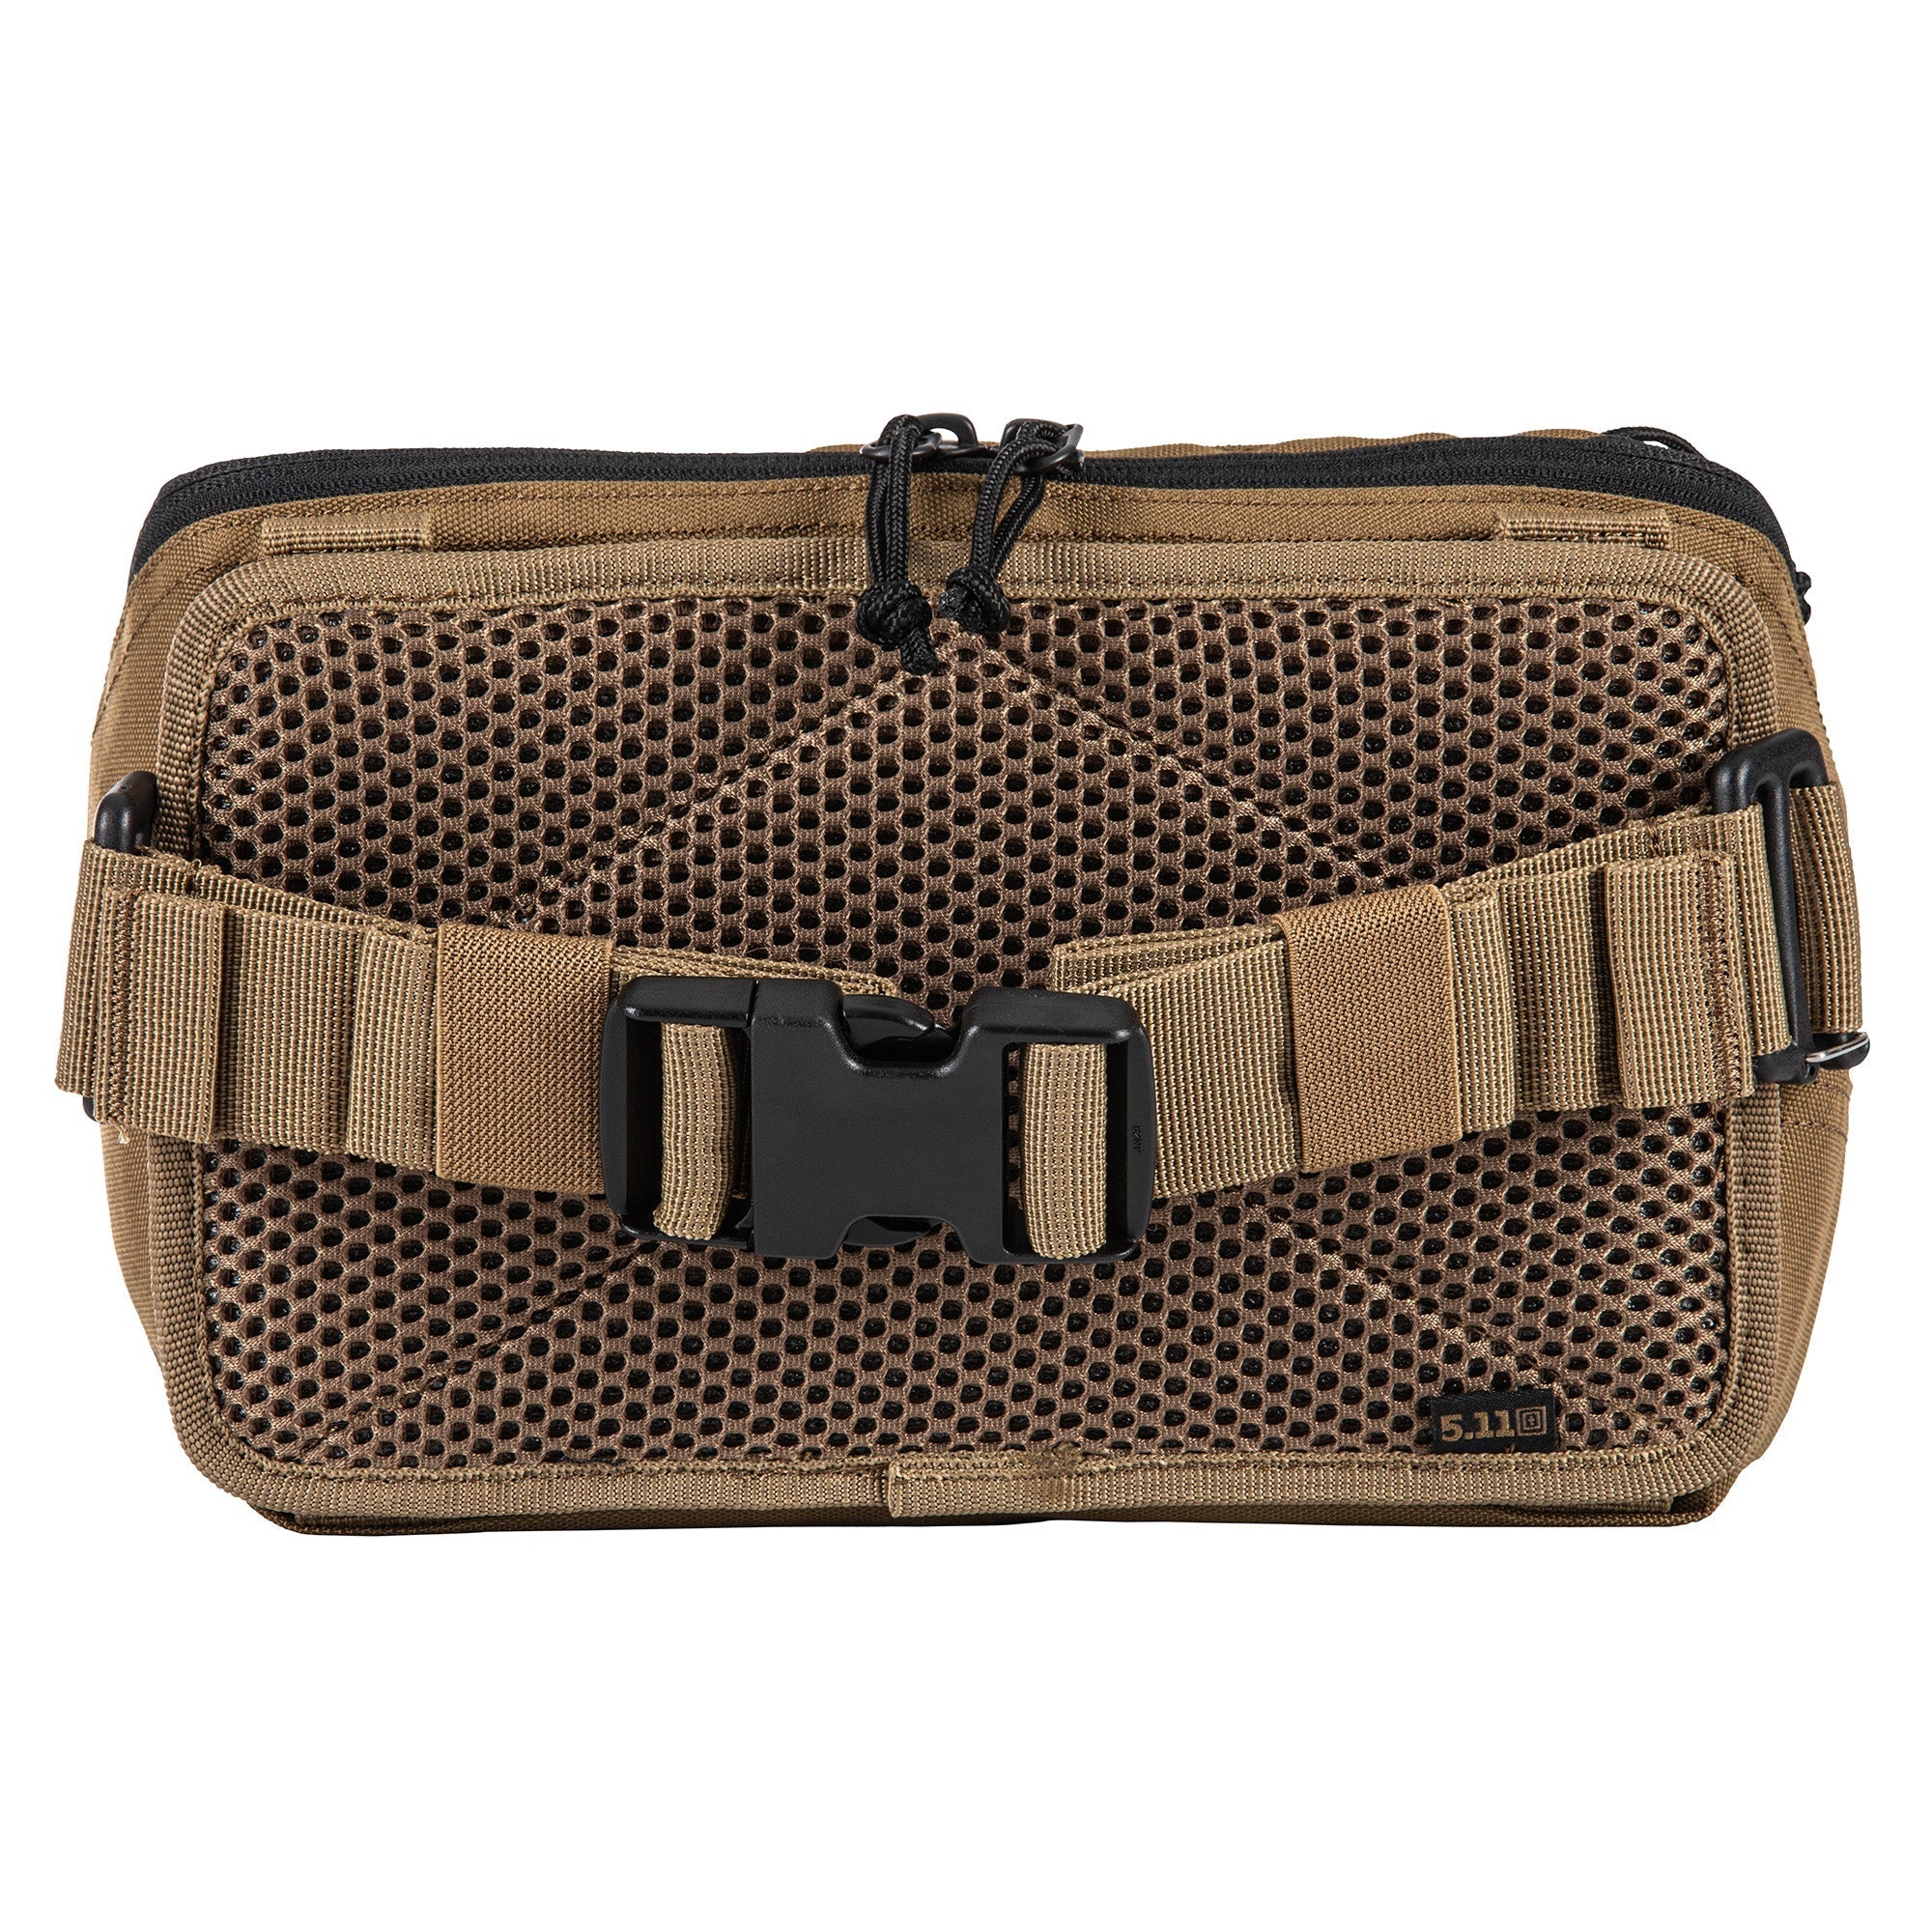 5.11 Tactical Rapid Waist Pack Bags, Packs and Cases 5.11 Tactical Tactical Gear Supplier Tactical Distributors Australia